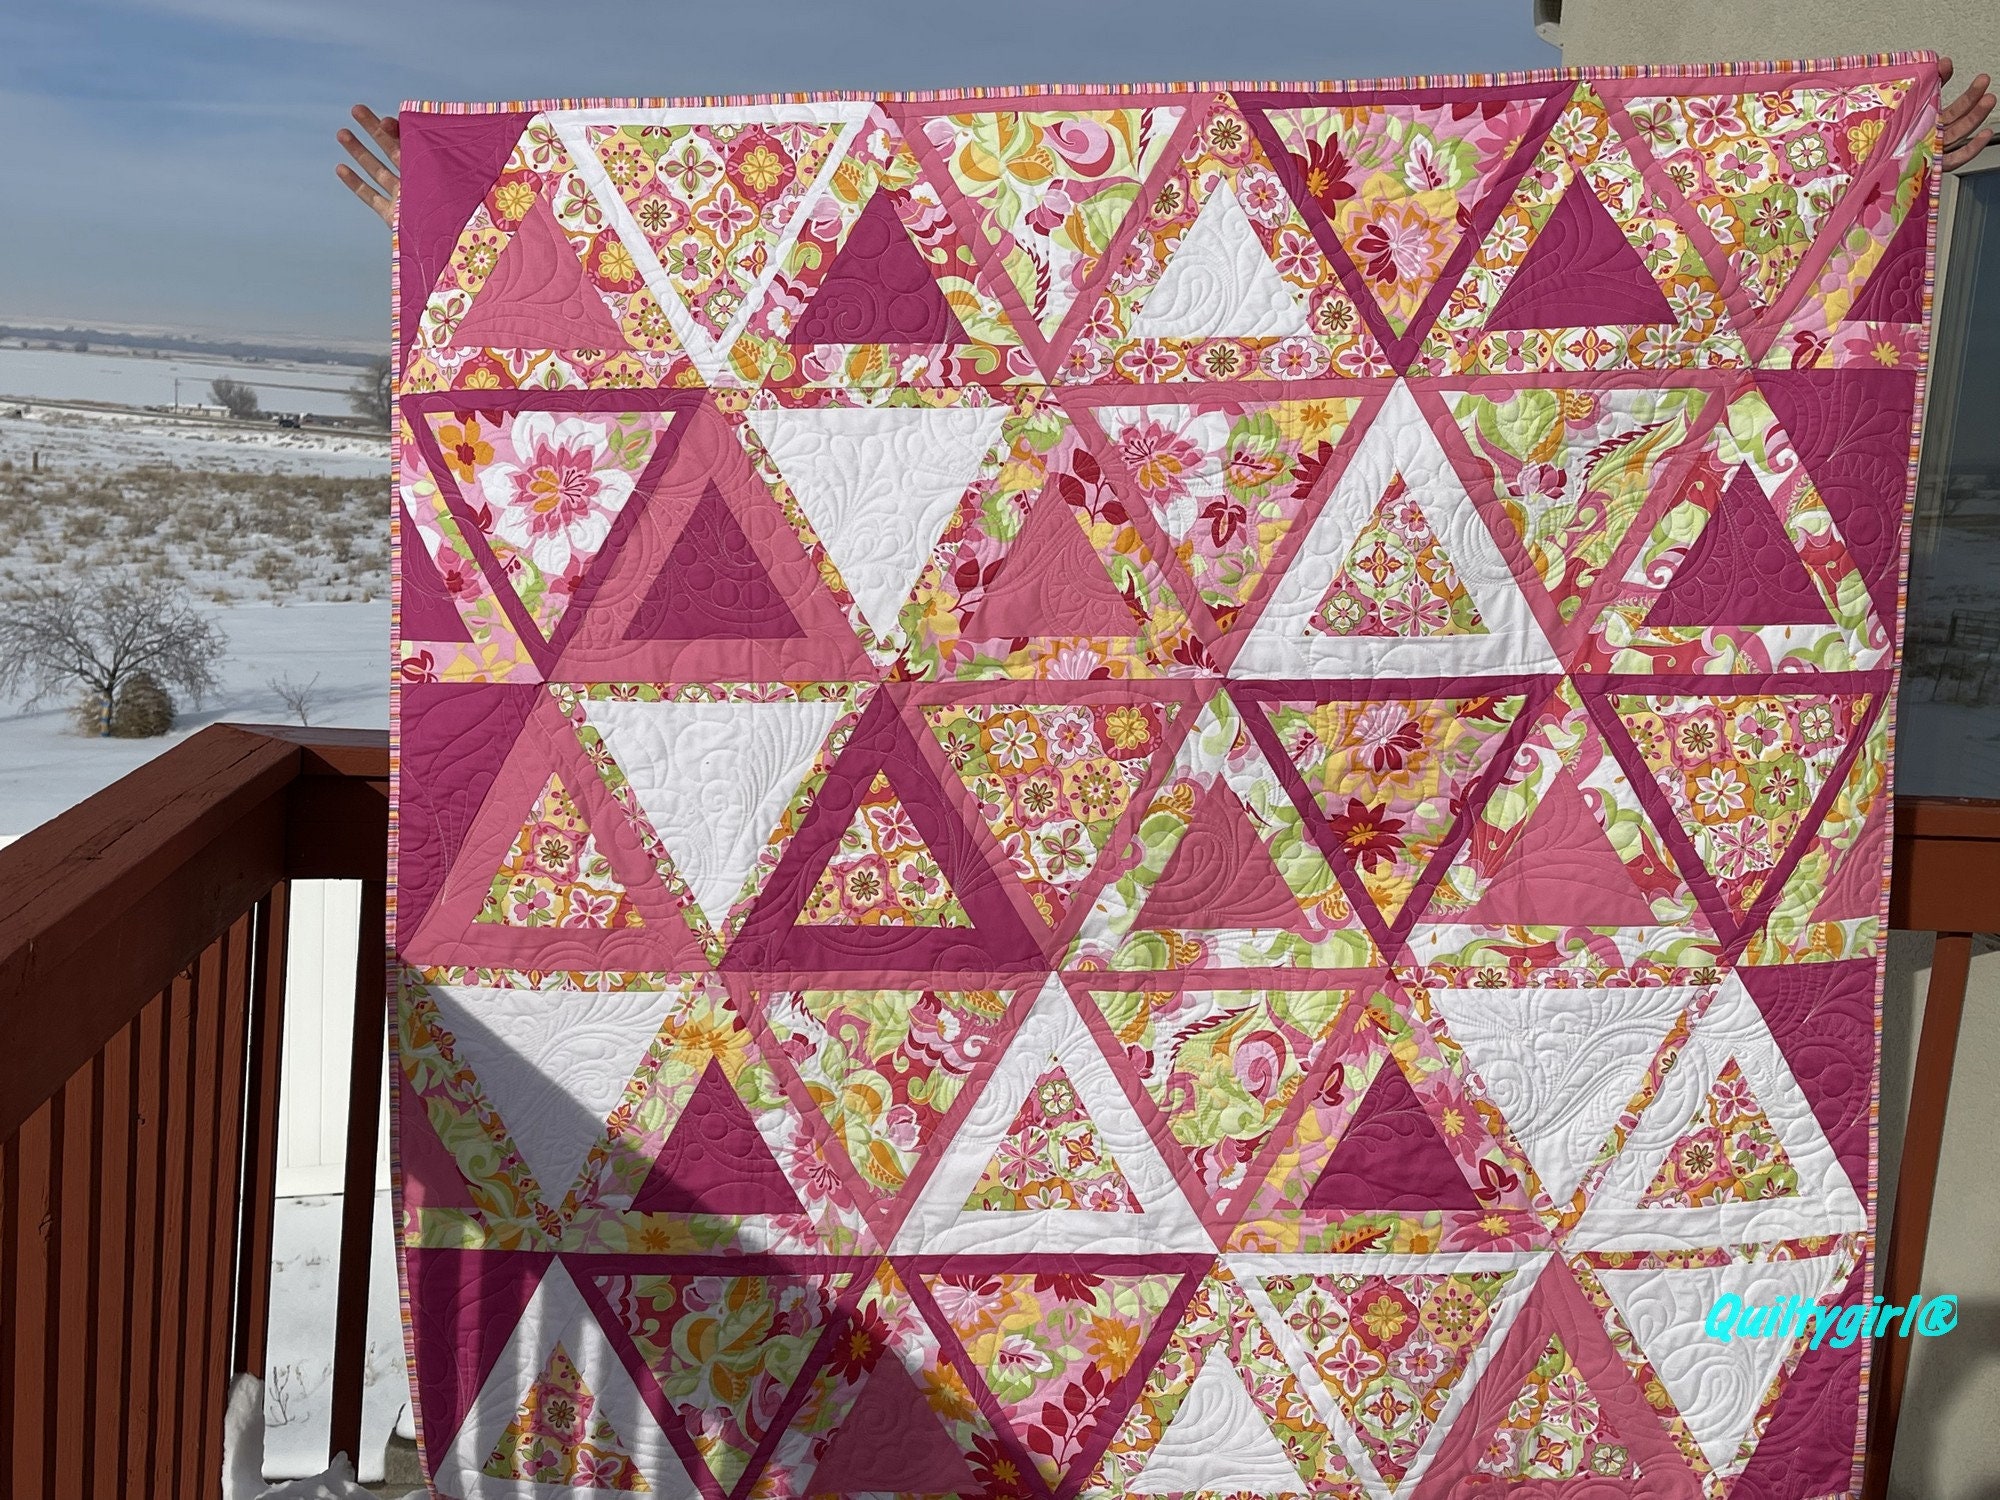 Quilt pattern triangles modern quilting gifts for girly floral lovers  modern pink home Shower Curtain by CharlotteWinter